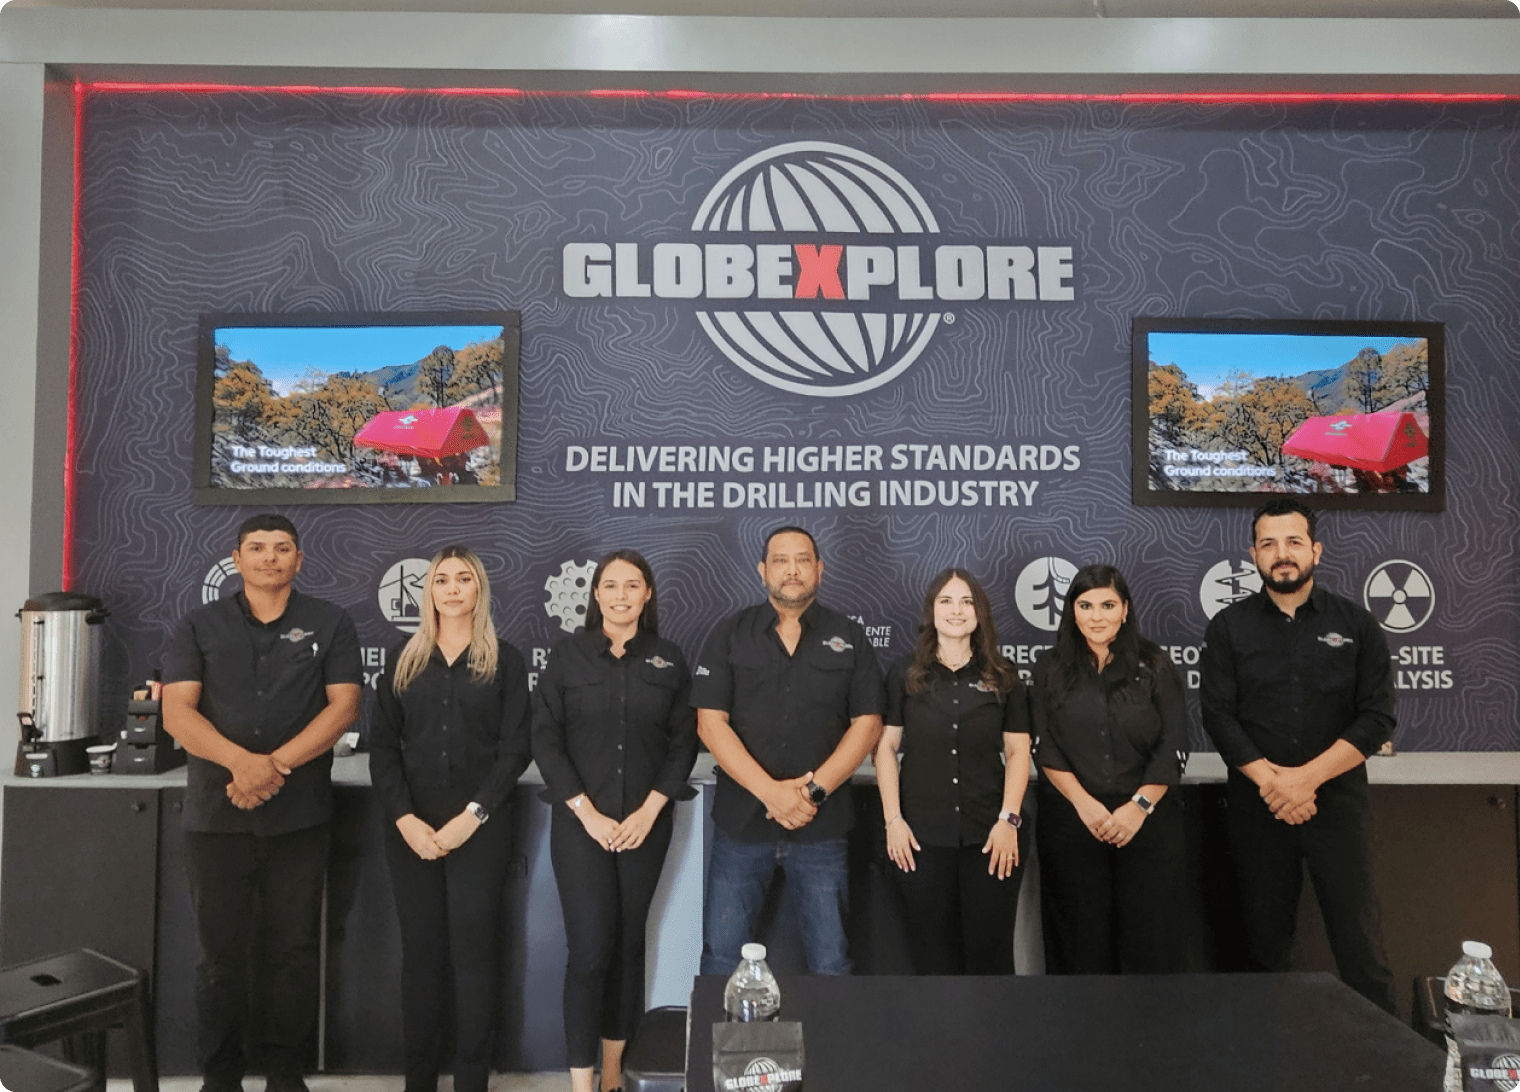 The Globexplore team proudly holds the award of Socially Responsible Company, an recognition they have been winning for eight consecutive years.